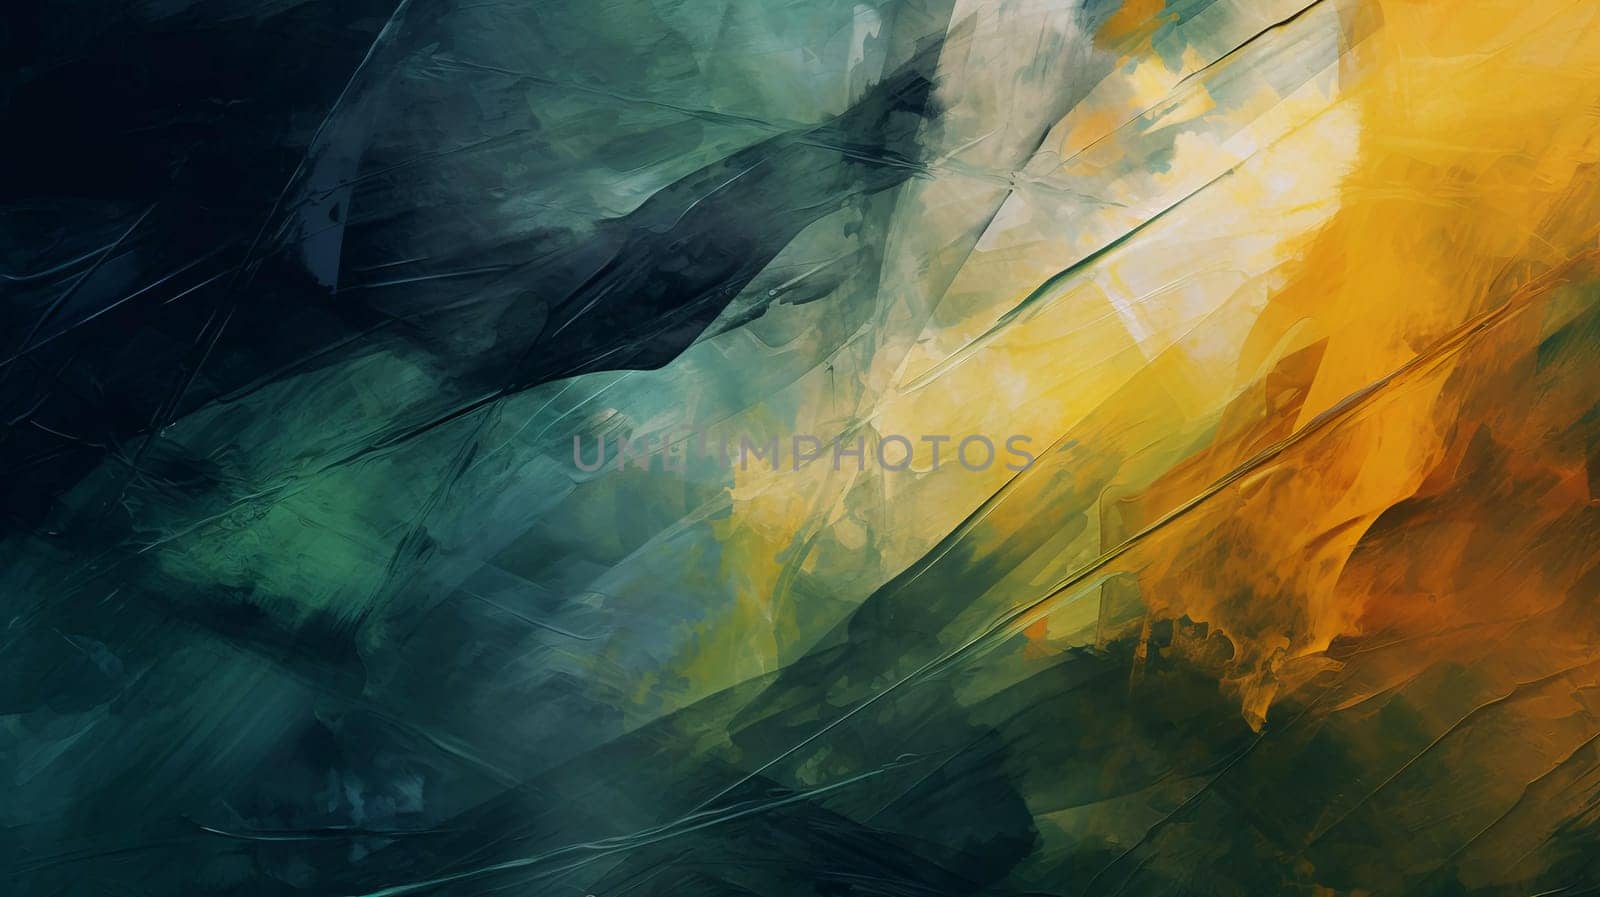 The dark abstract background is made in the grunge style, hand-painted in brown, green, yellow and dark blue colors